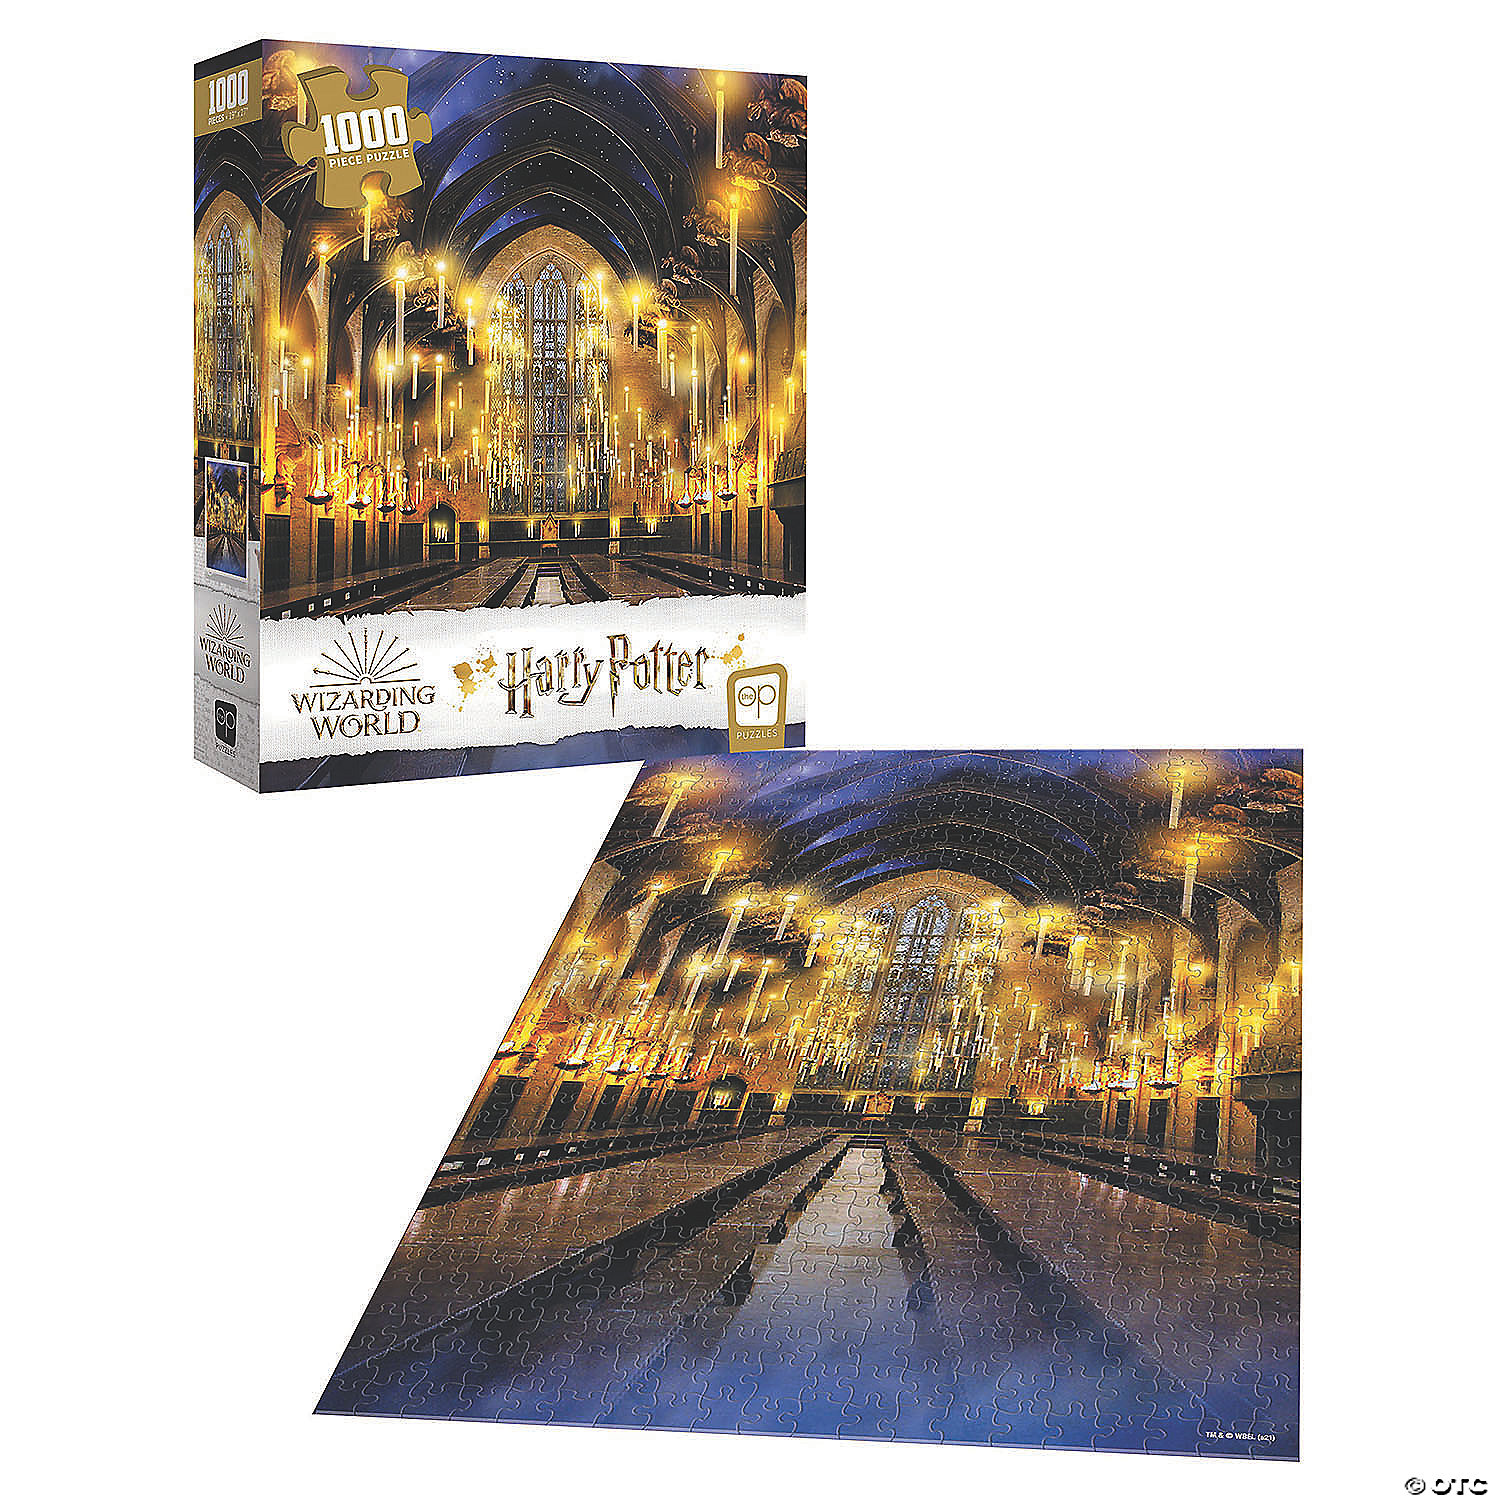 BRAND NEW LICENSED HARRY POTTER 1000PC PUZZLE HOGWARTS EXPRESS